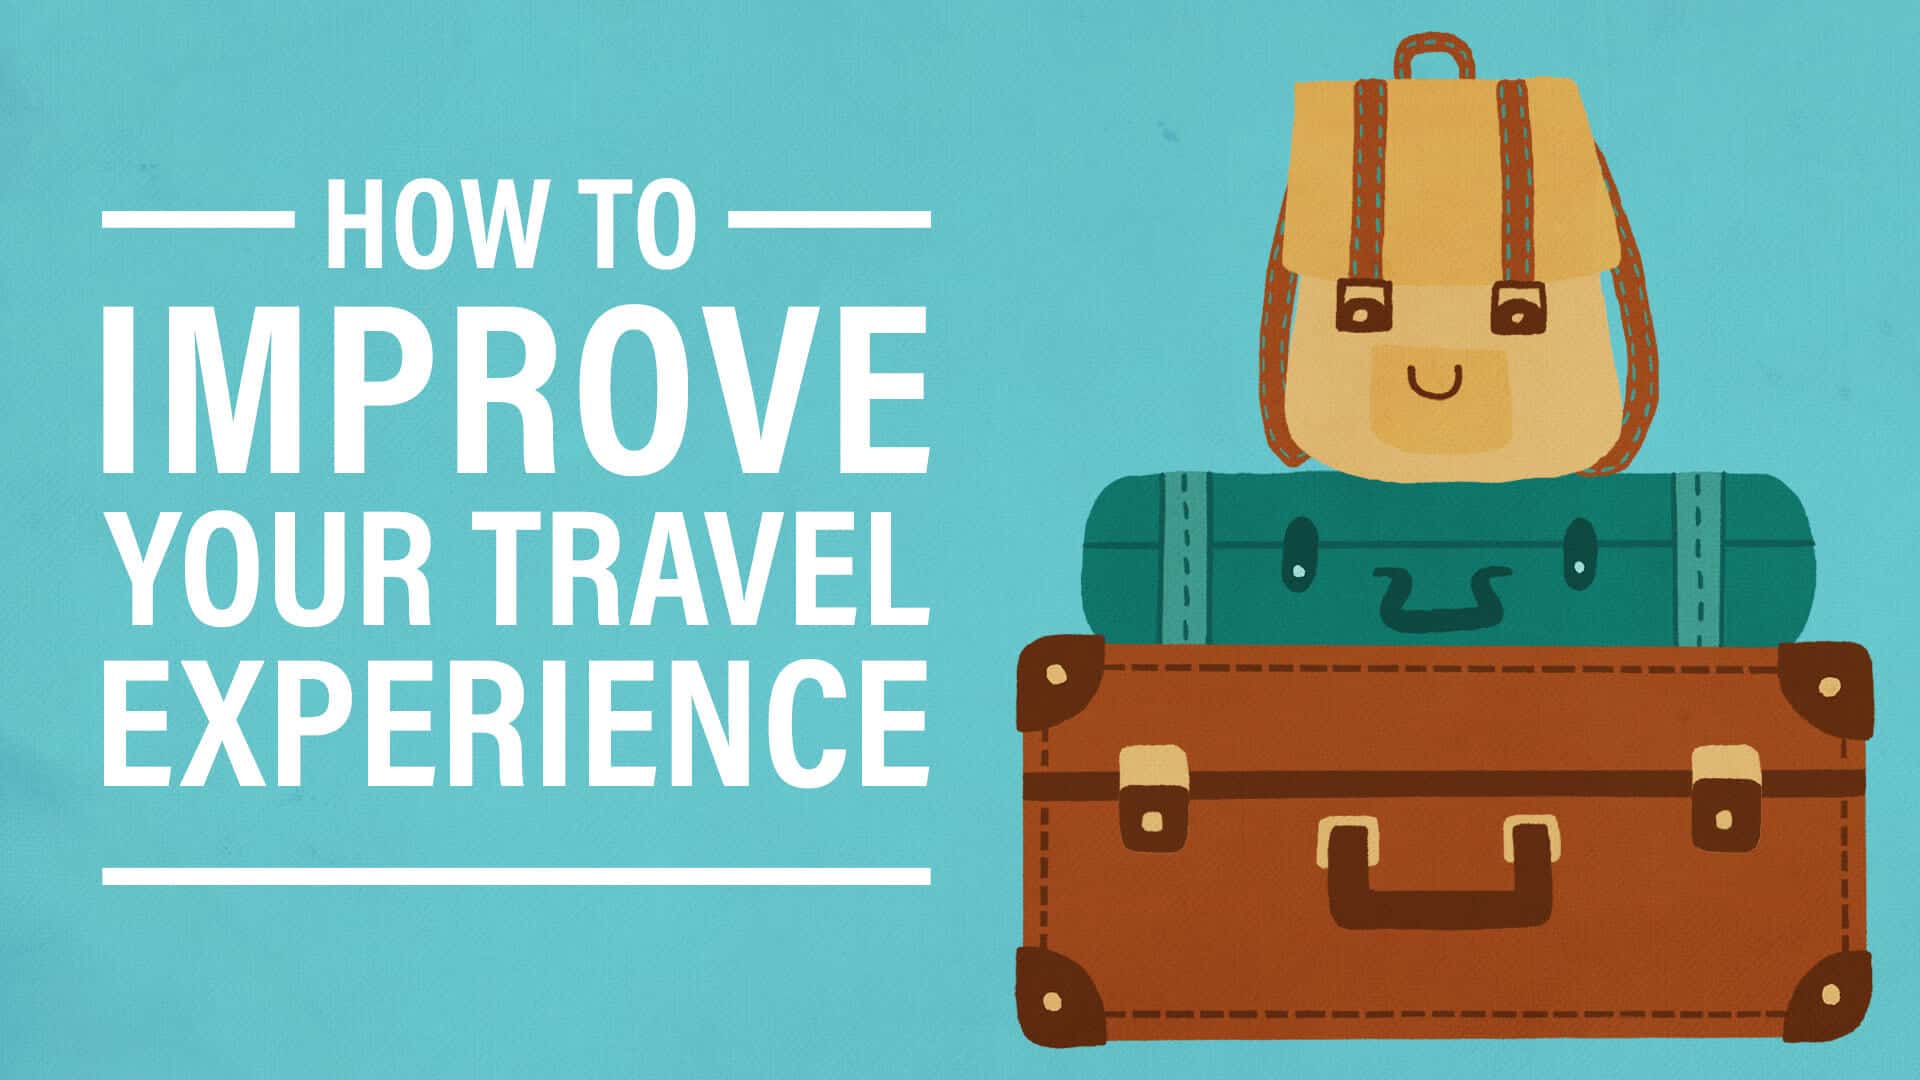 Travel experience. Bad Travel experience. Bad travelling experience. Unlock your Travel. How was your traveling